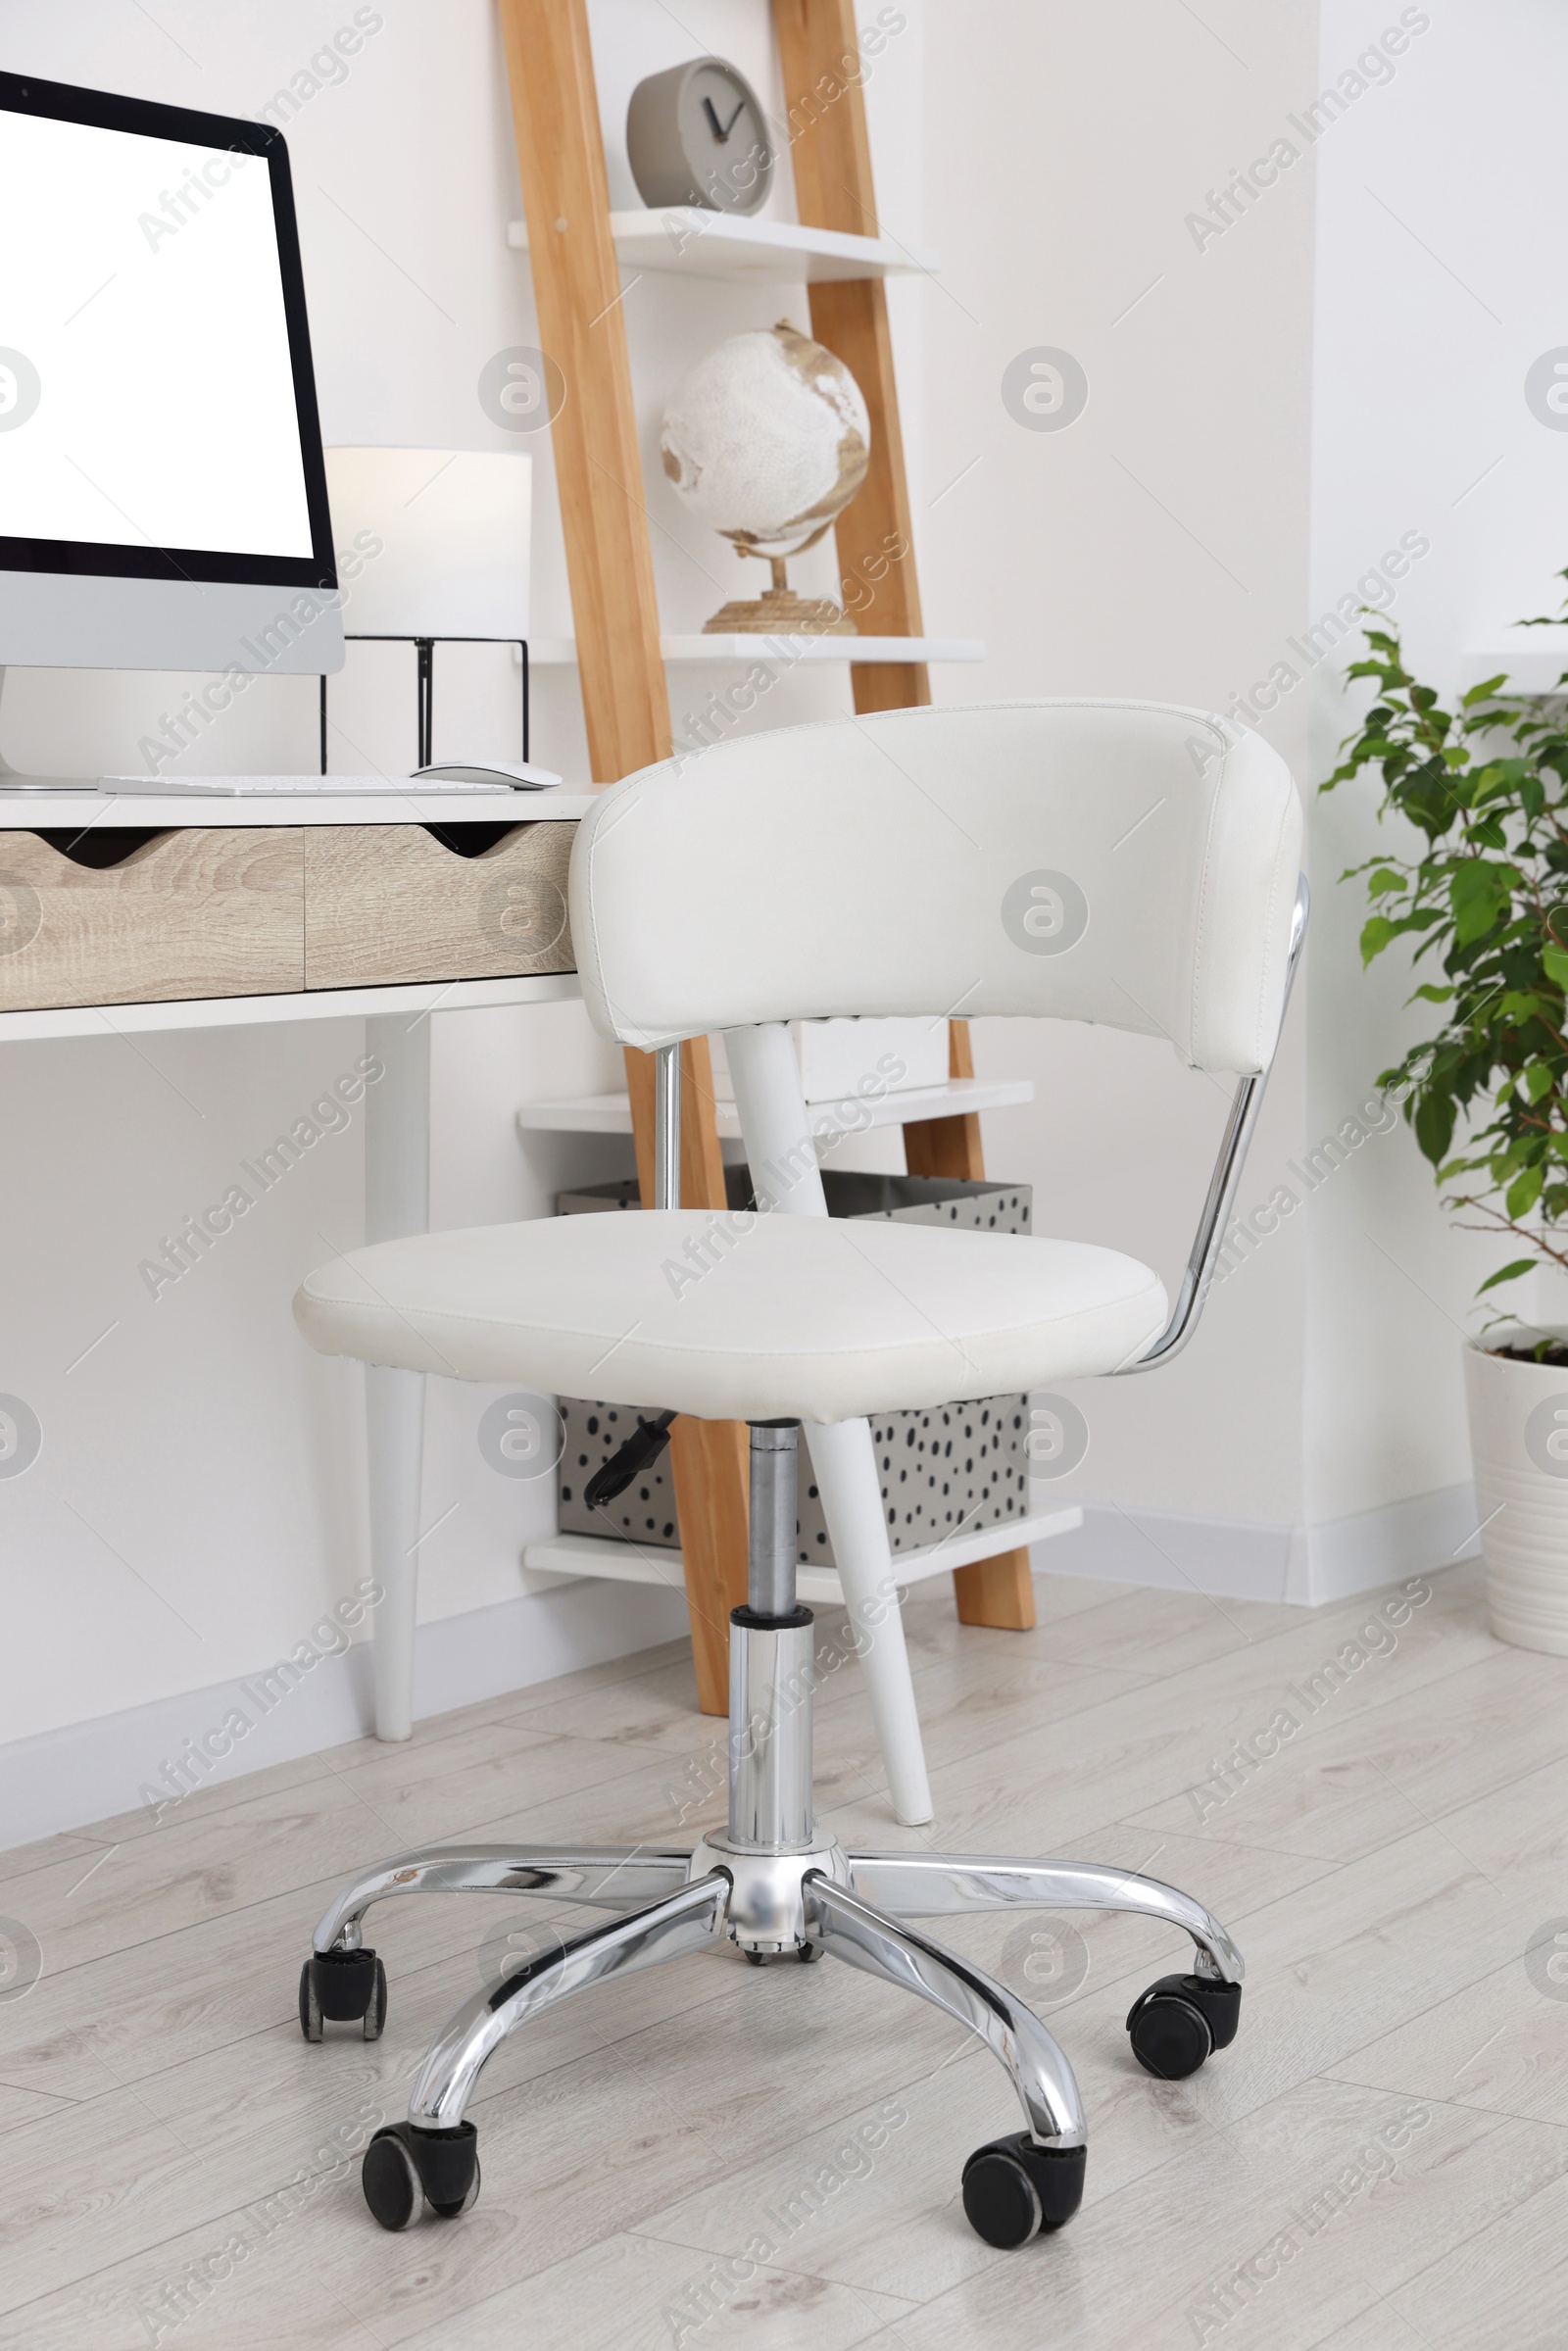 Photo of Workplace with comfortable office chair indoors. Interior design